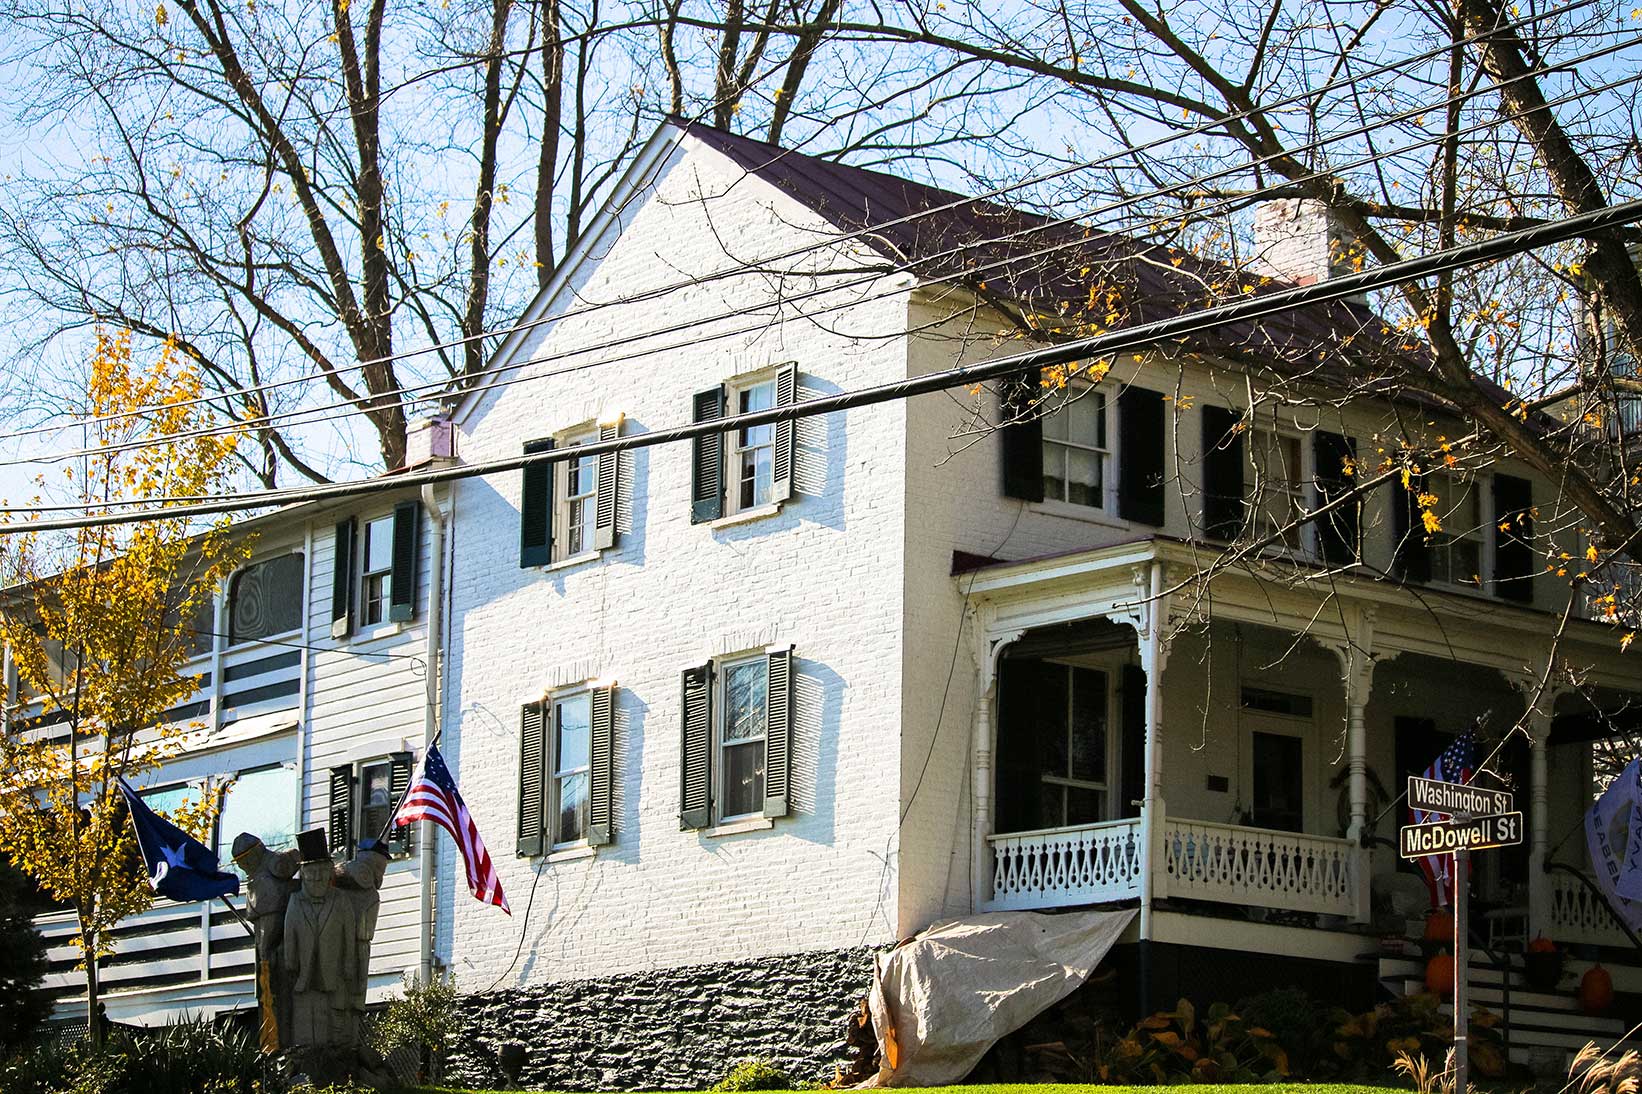 White single family home with statue in Harper's Ferry, WV